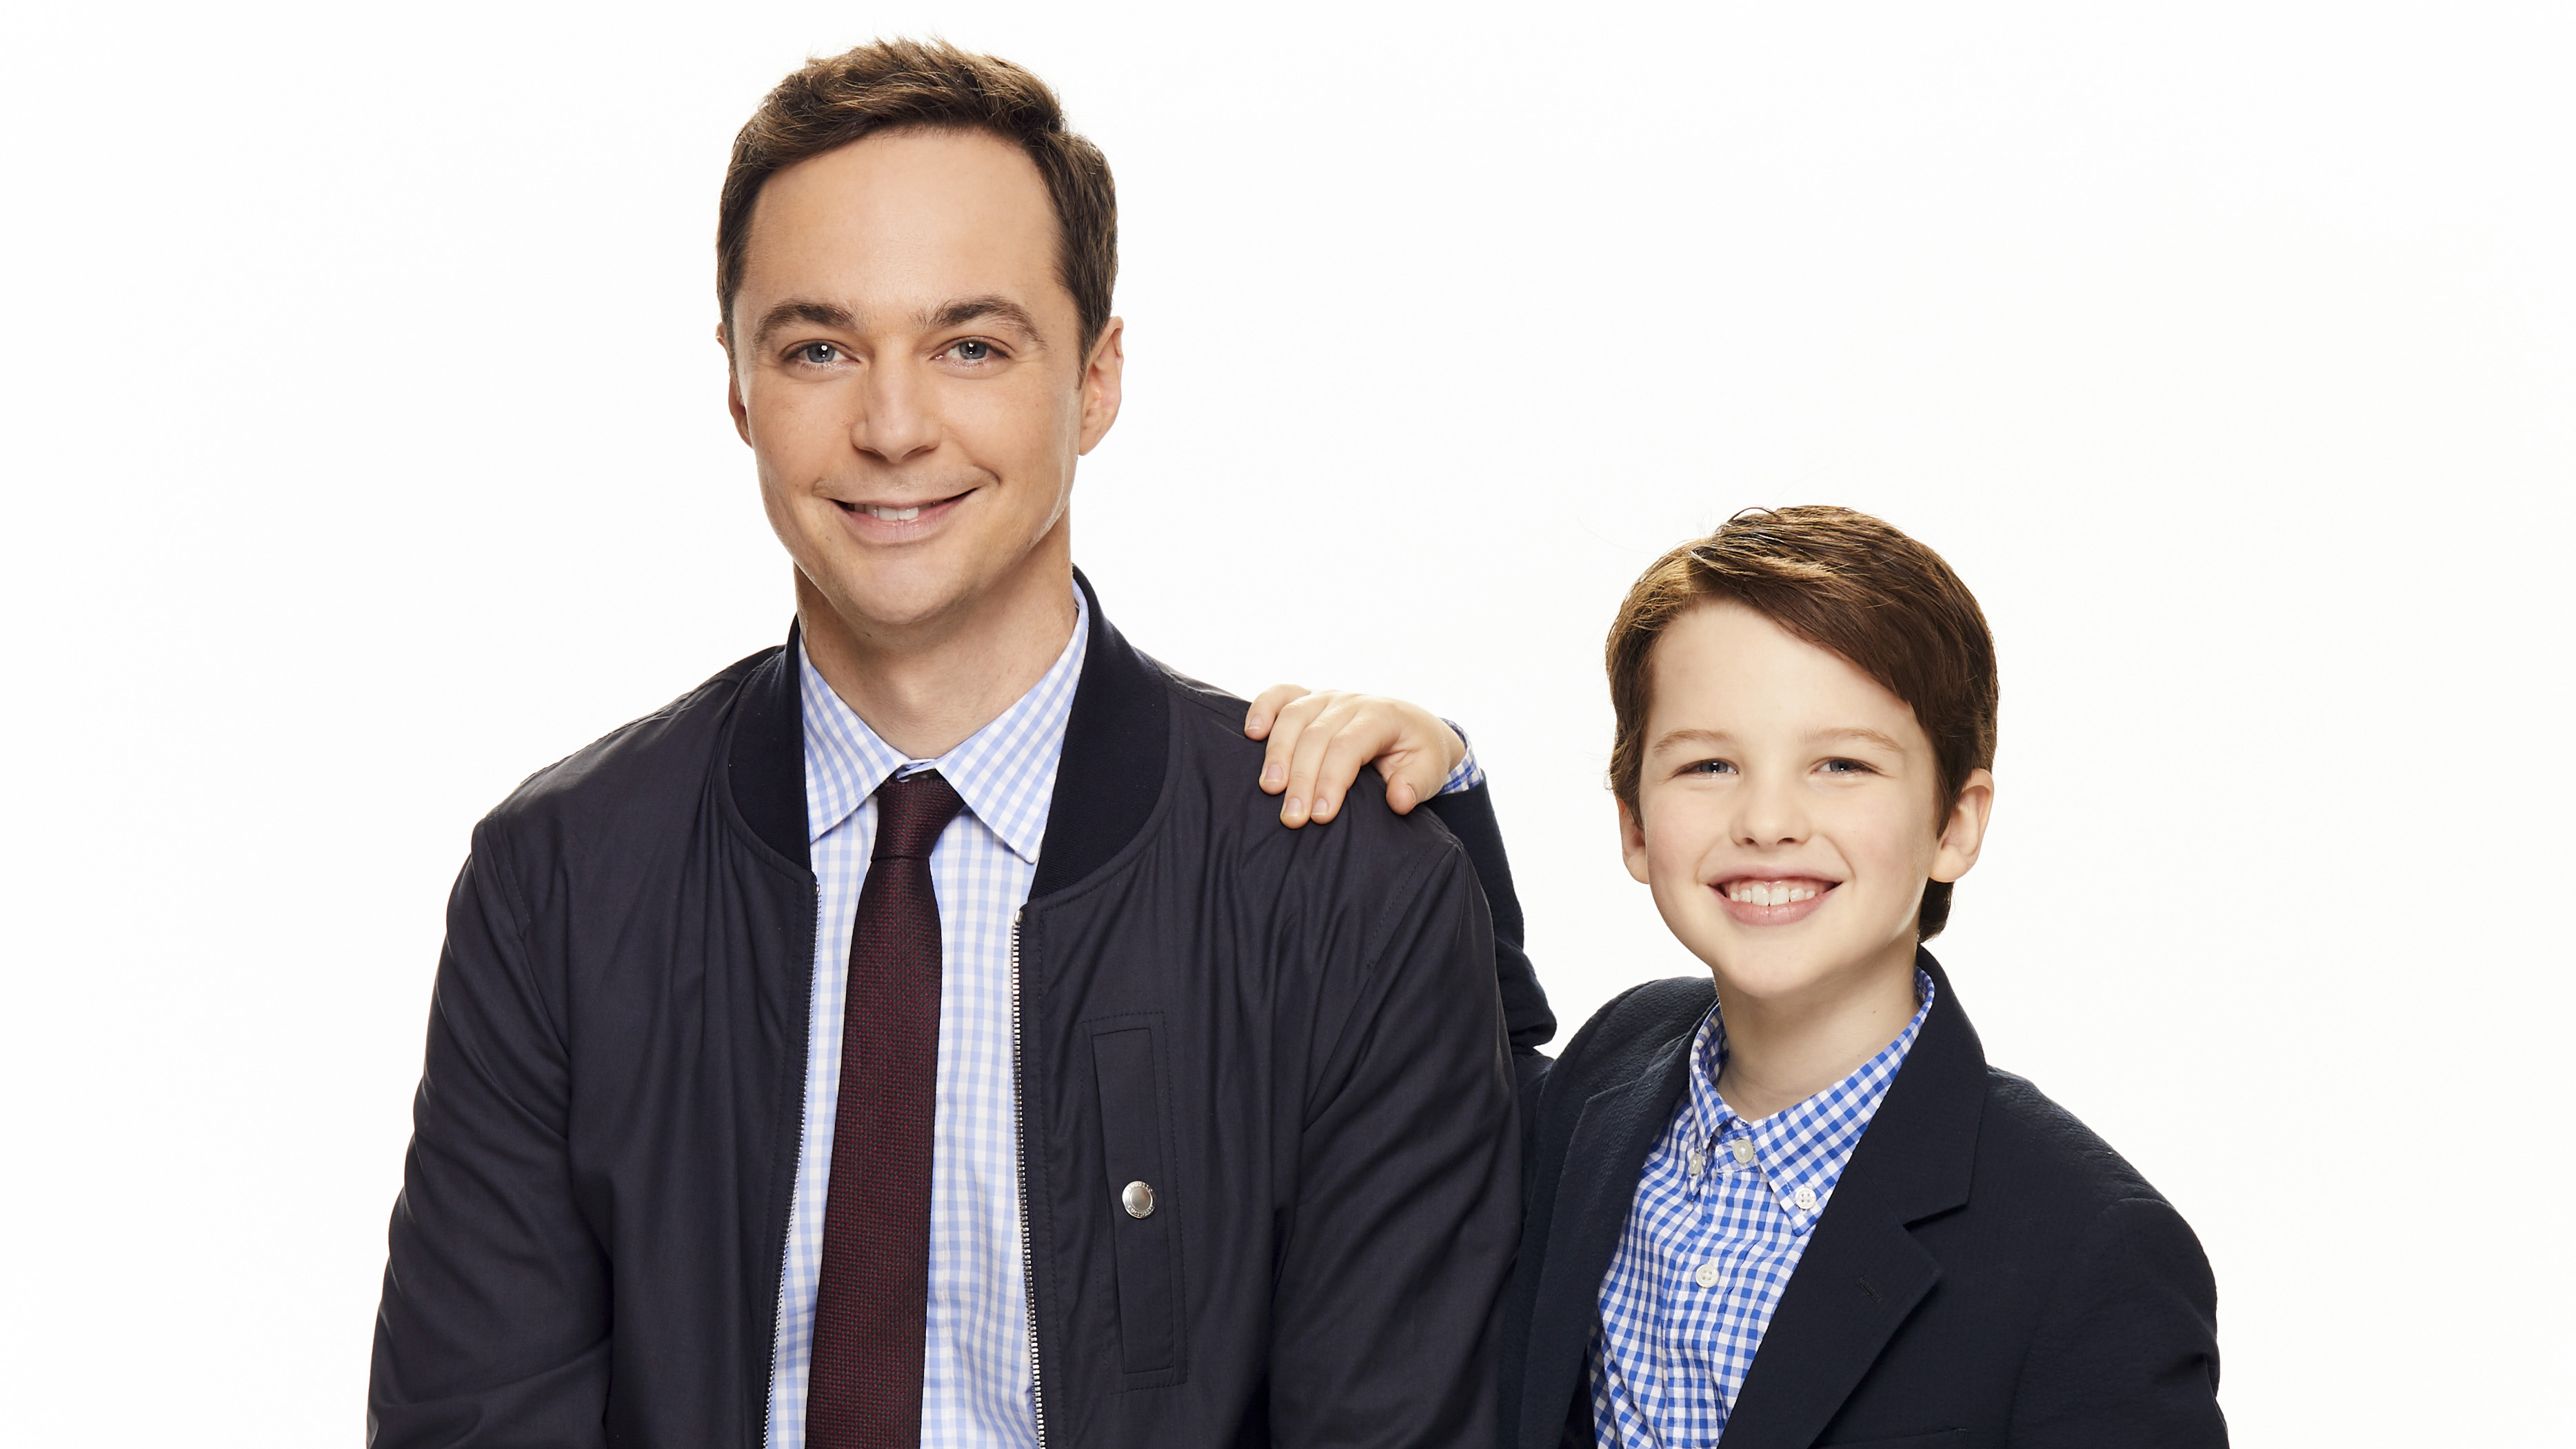 Jim Parsons And Young Sheldon, HD Tv Shows, 4k Wallpapers, Image